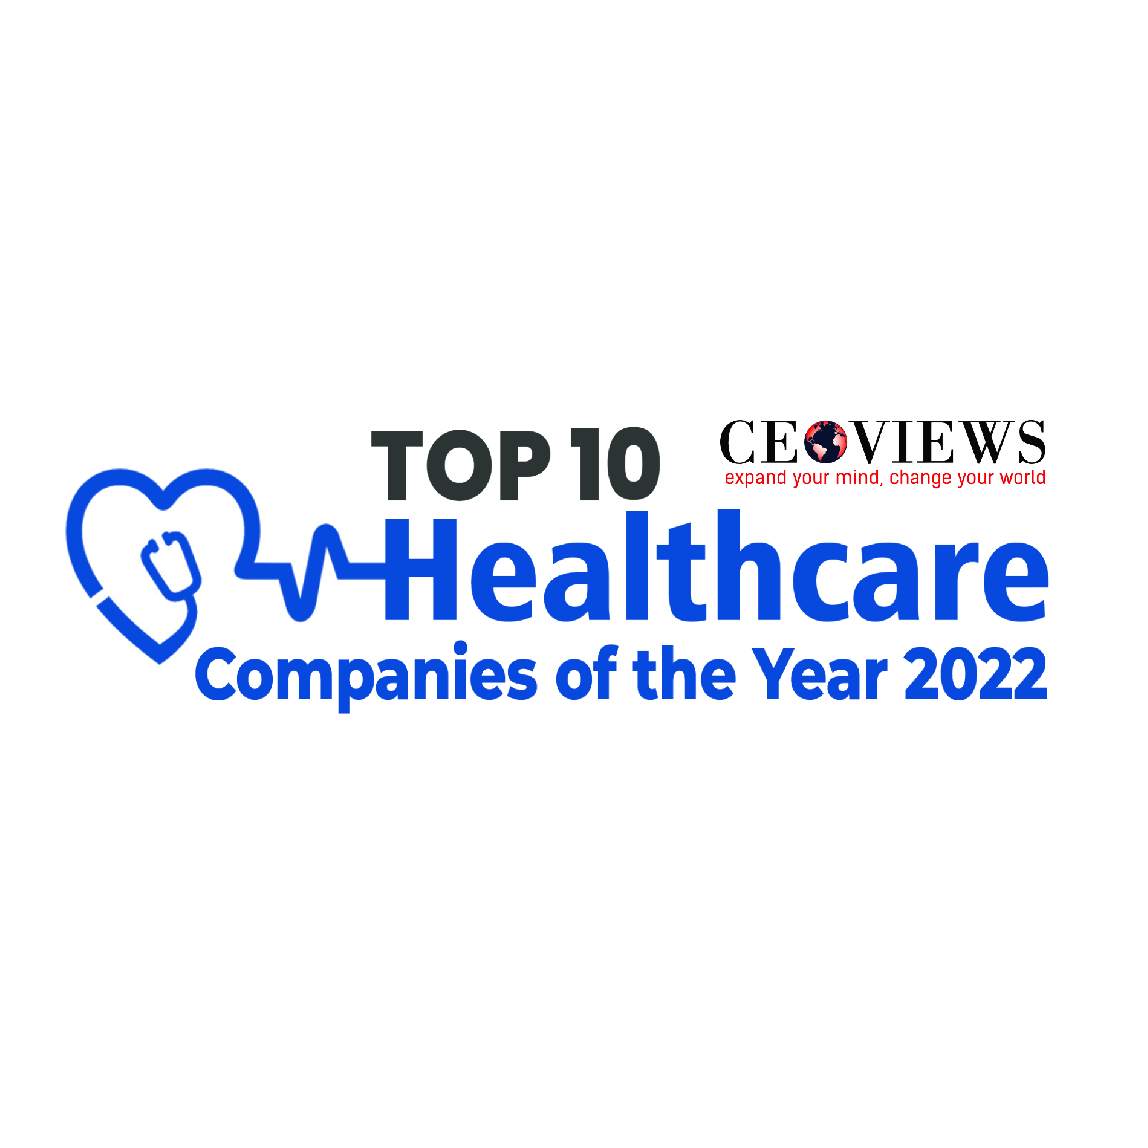 Top 10 Healthcare Companies of the Year 2022